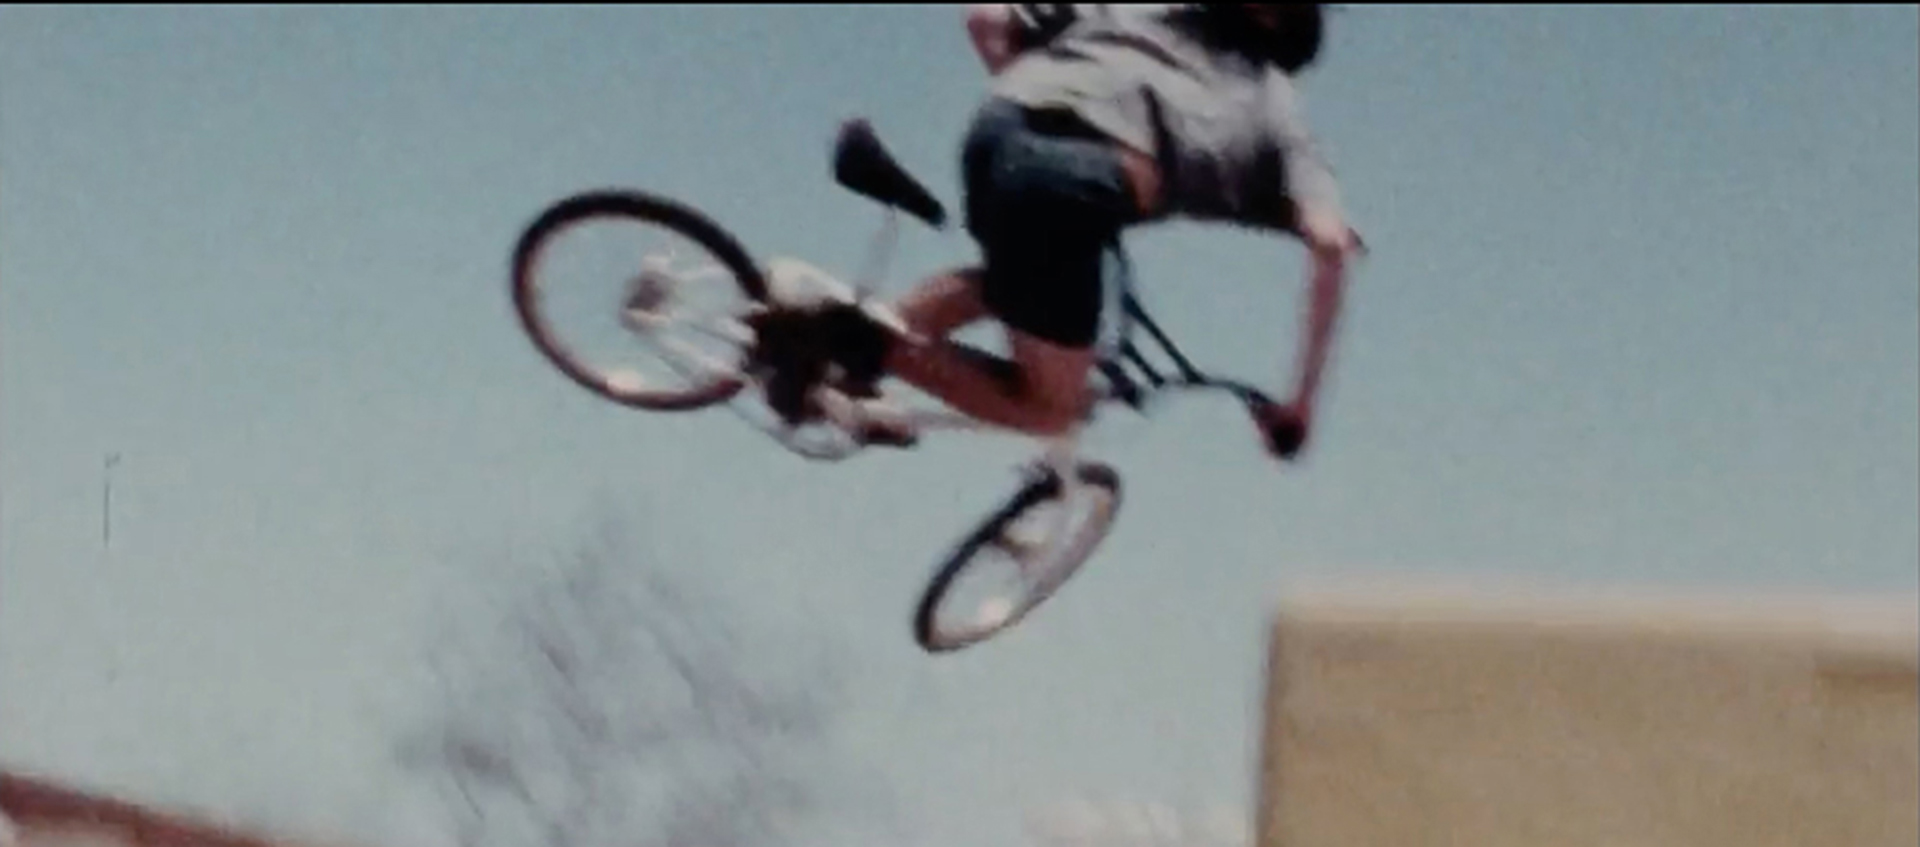 A blurry still featuring a person on a bike in the air over a skateboard ramp.